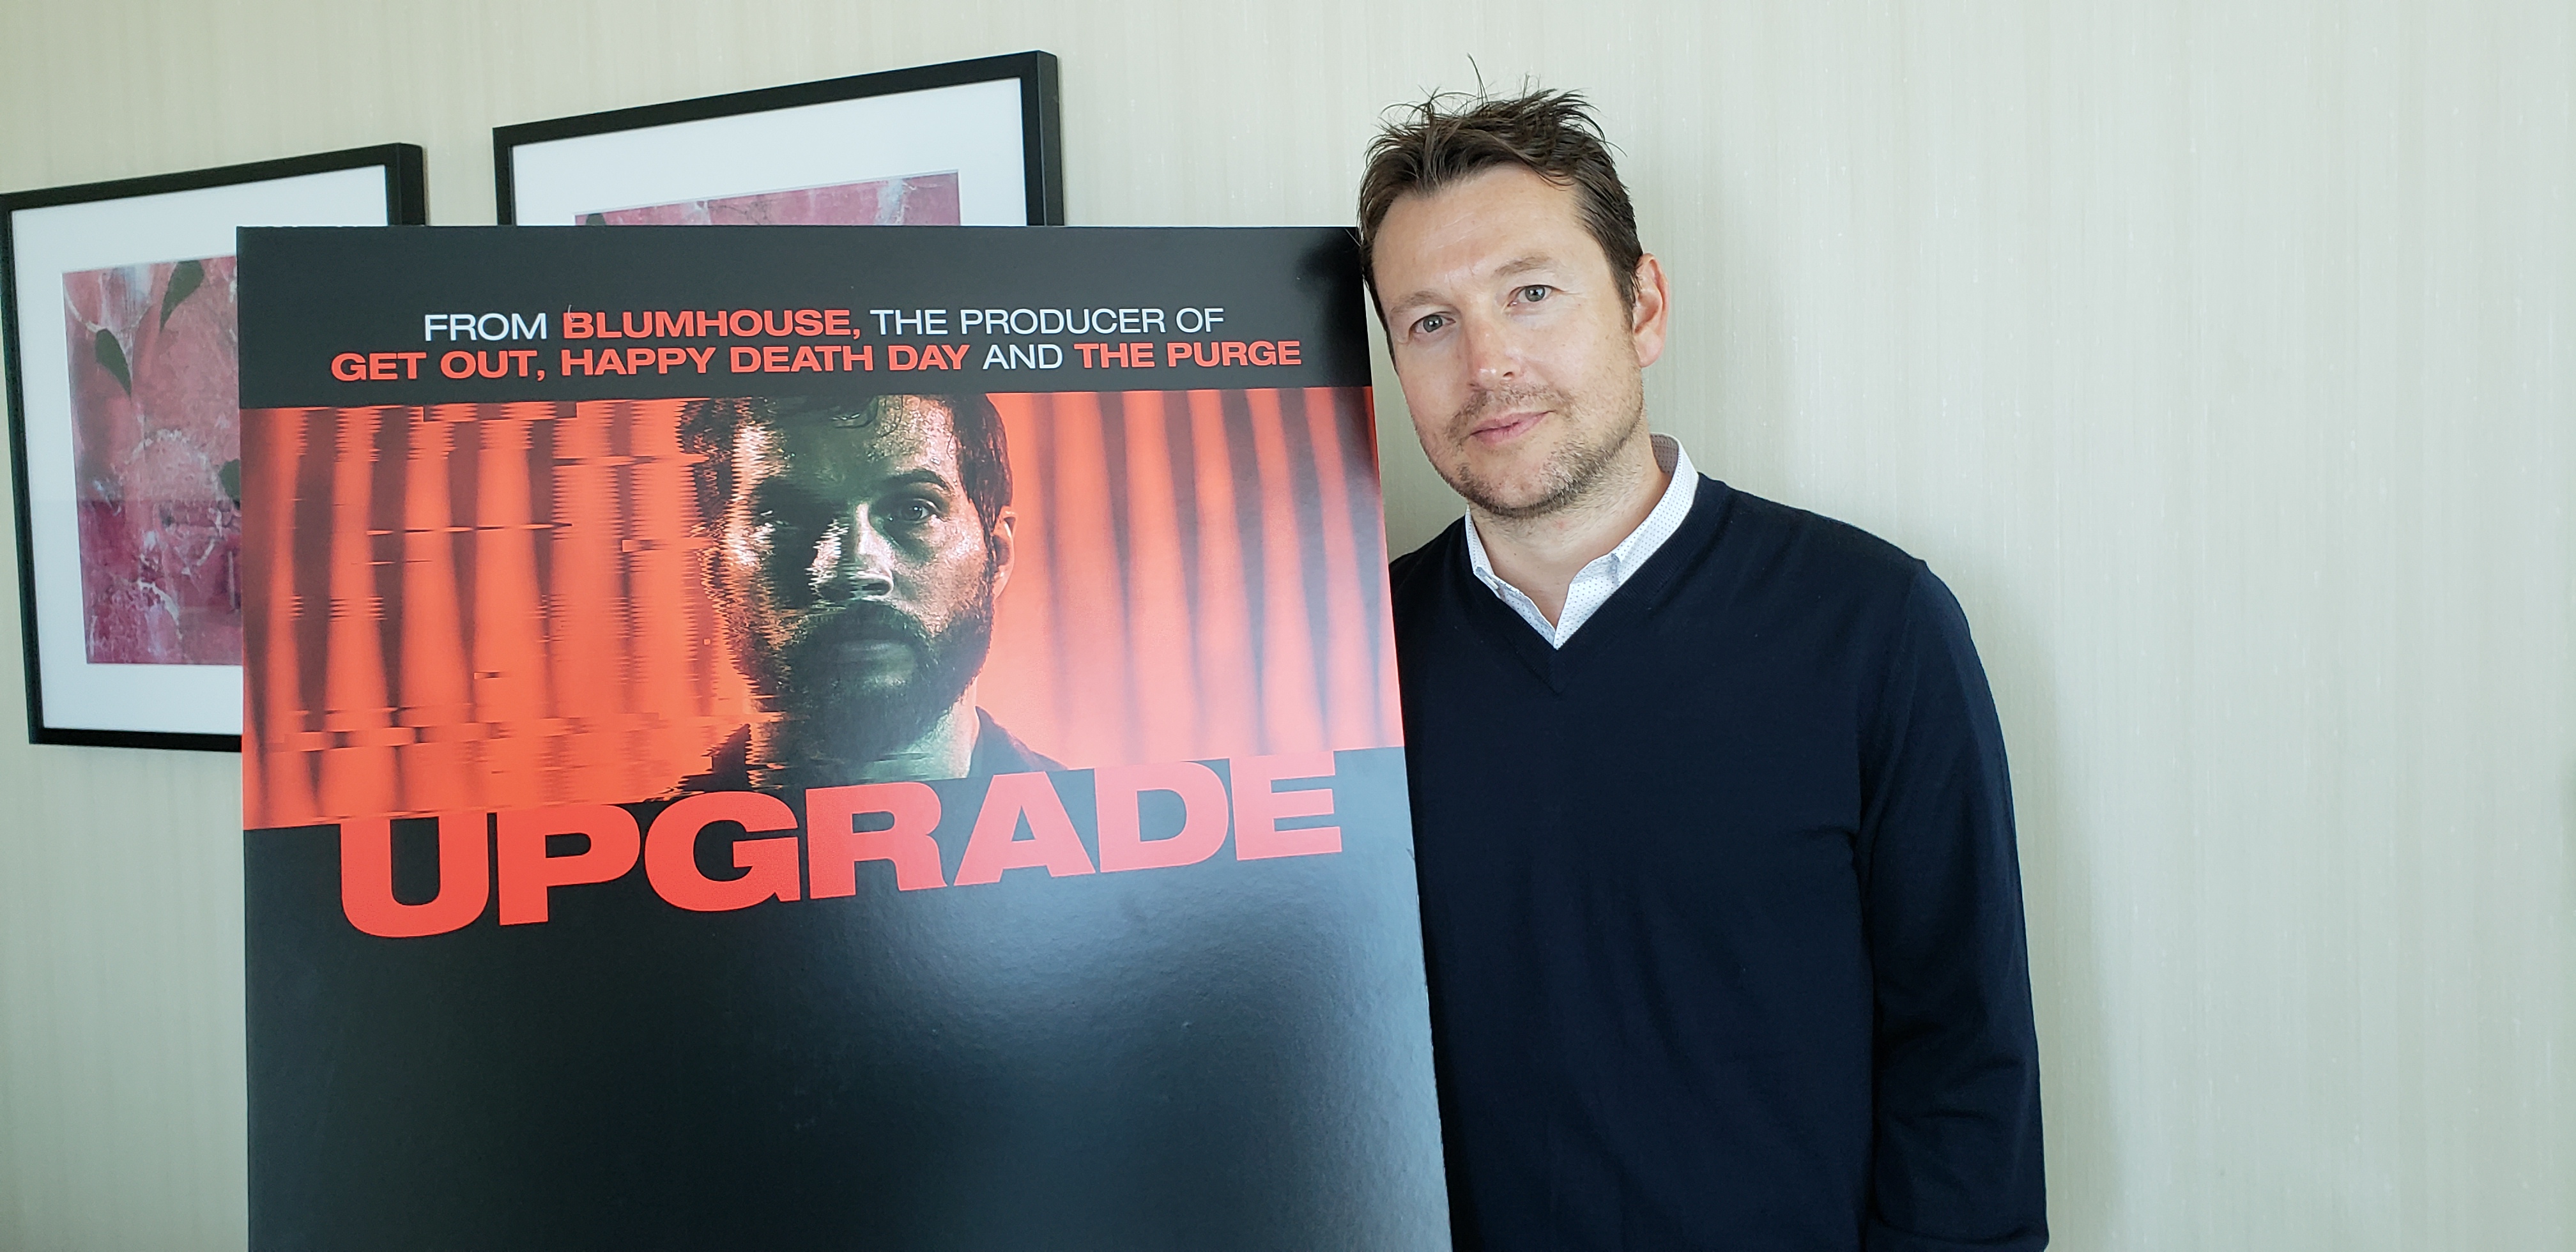 leigh_whannell_upgrade_photo_by_marco_cerritos.jpg